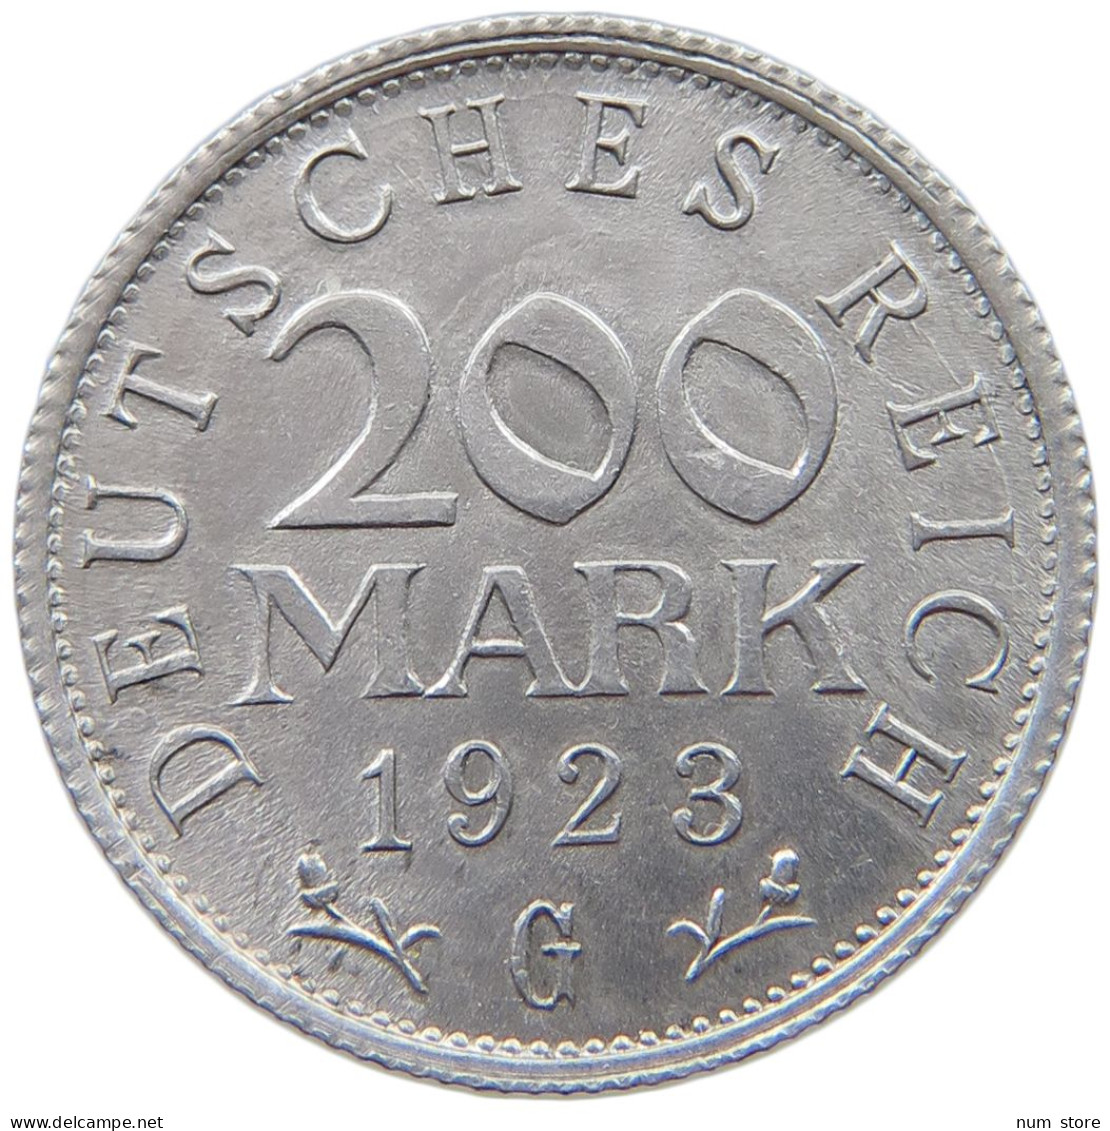 GERMANY WEIMAR 200 MARK 1923 G TOP #a021 0987 - 200 & 500 Mark